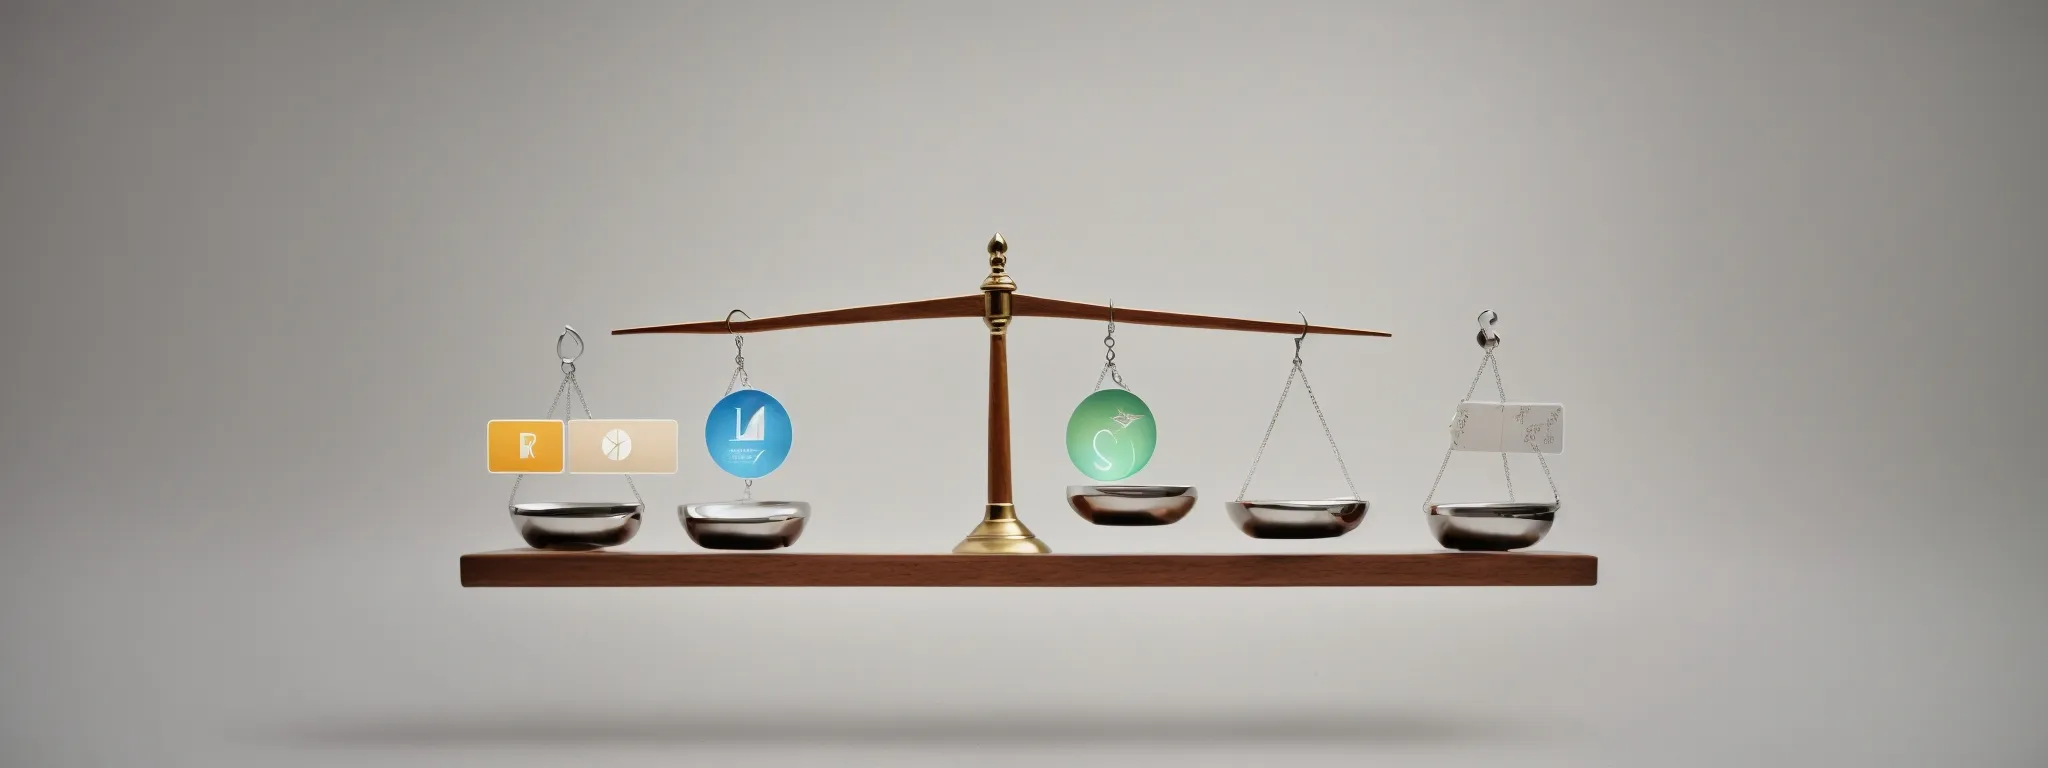 a visual metaphor depicting a balance scale with different search engine symbols on each side, emphasizing the concept of diversification in the digital search landscape.